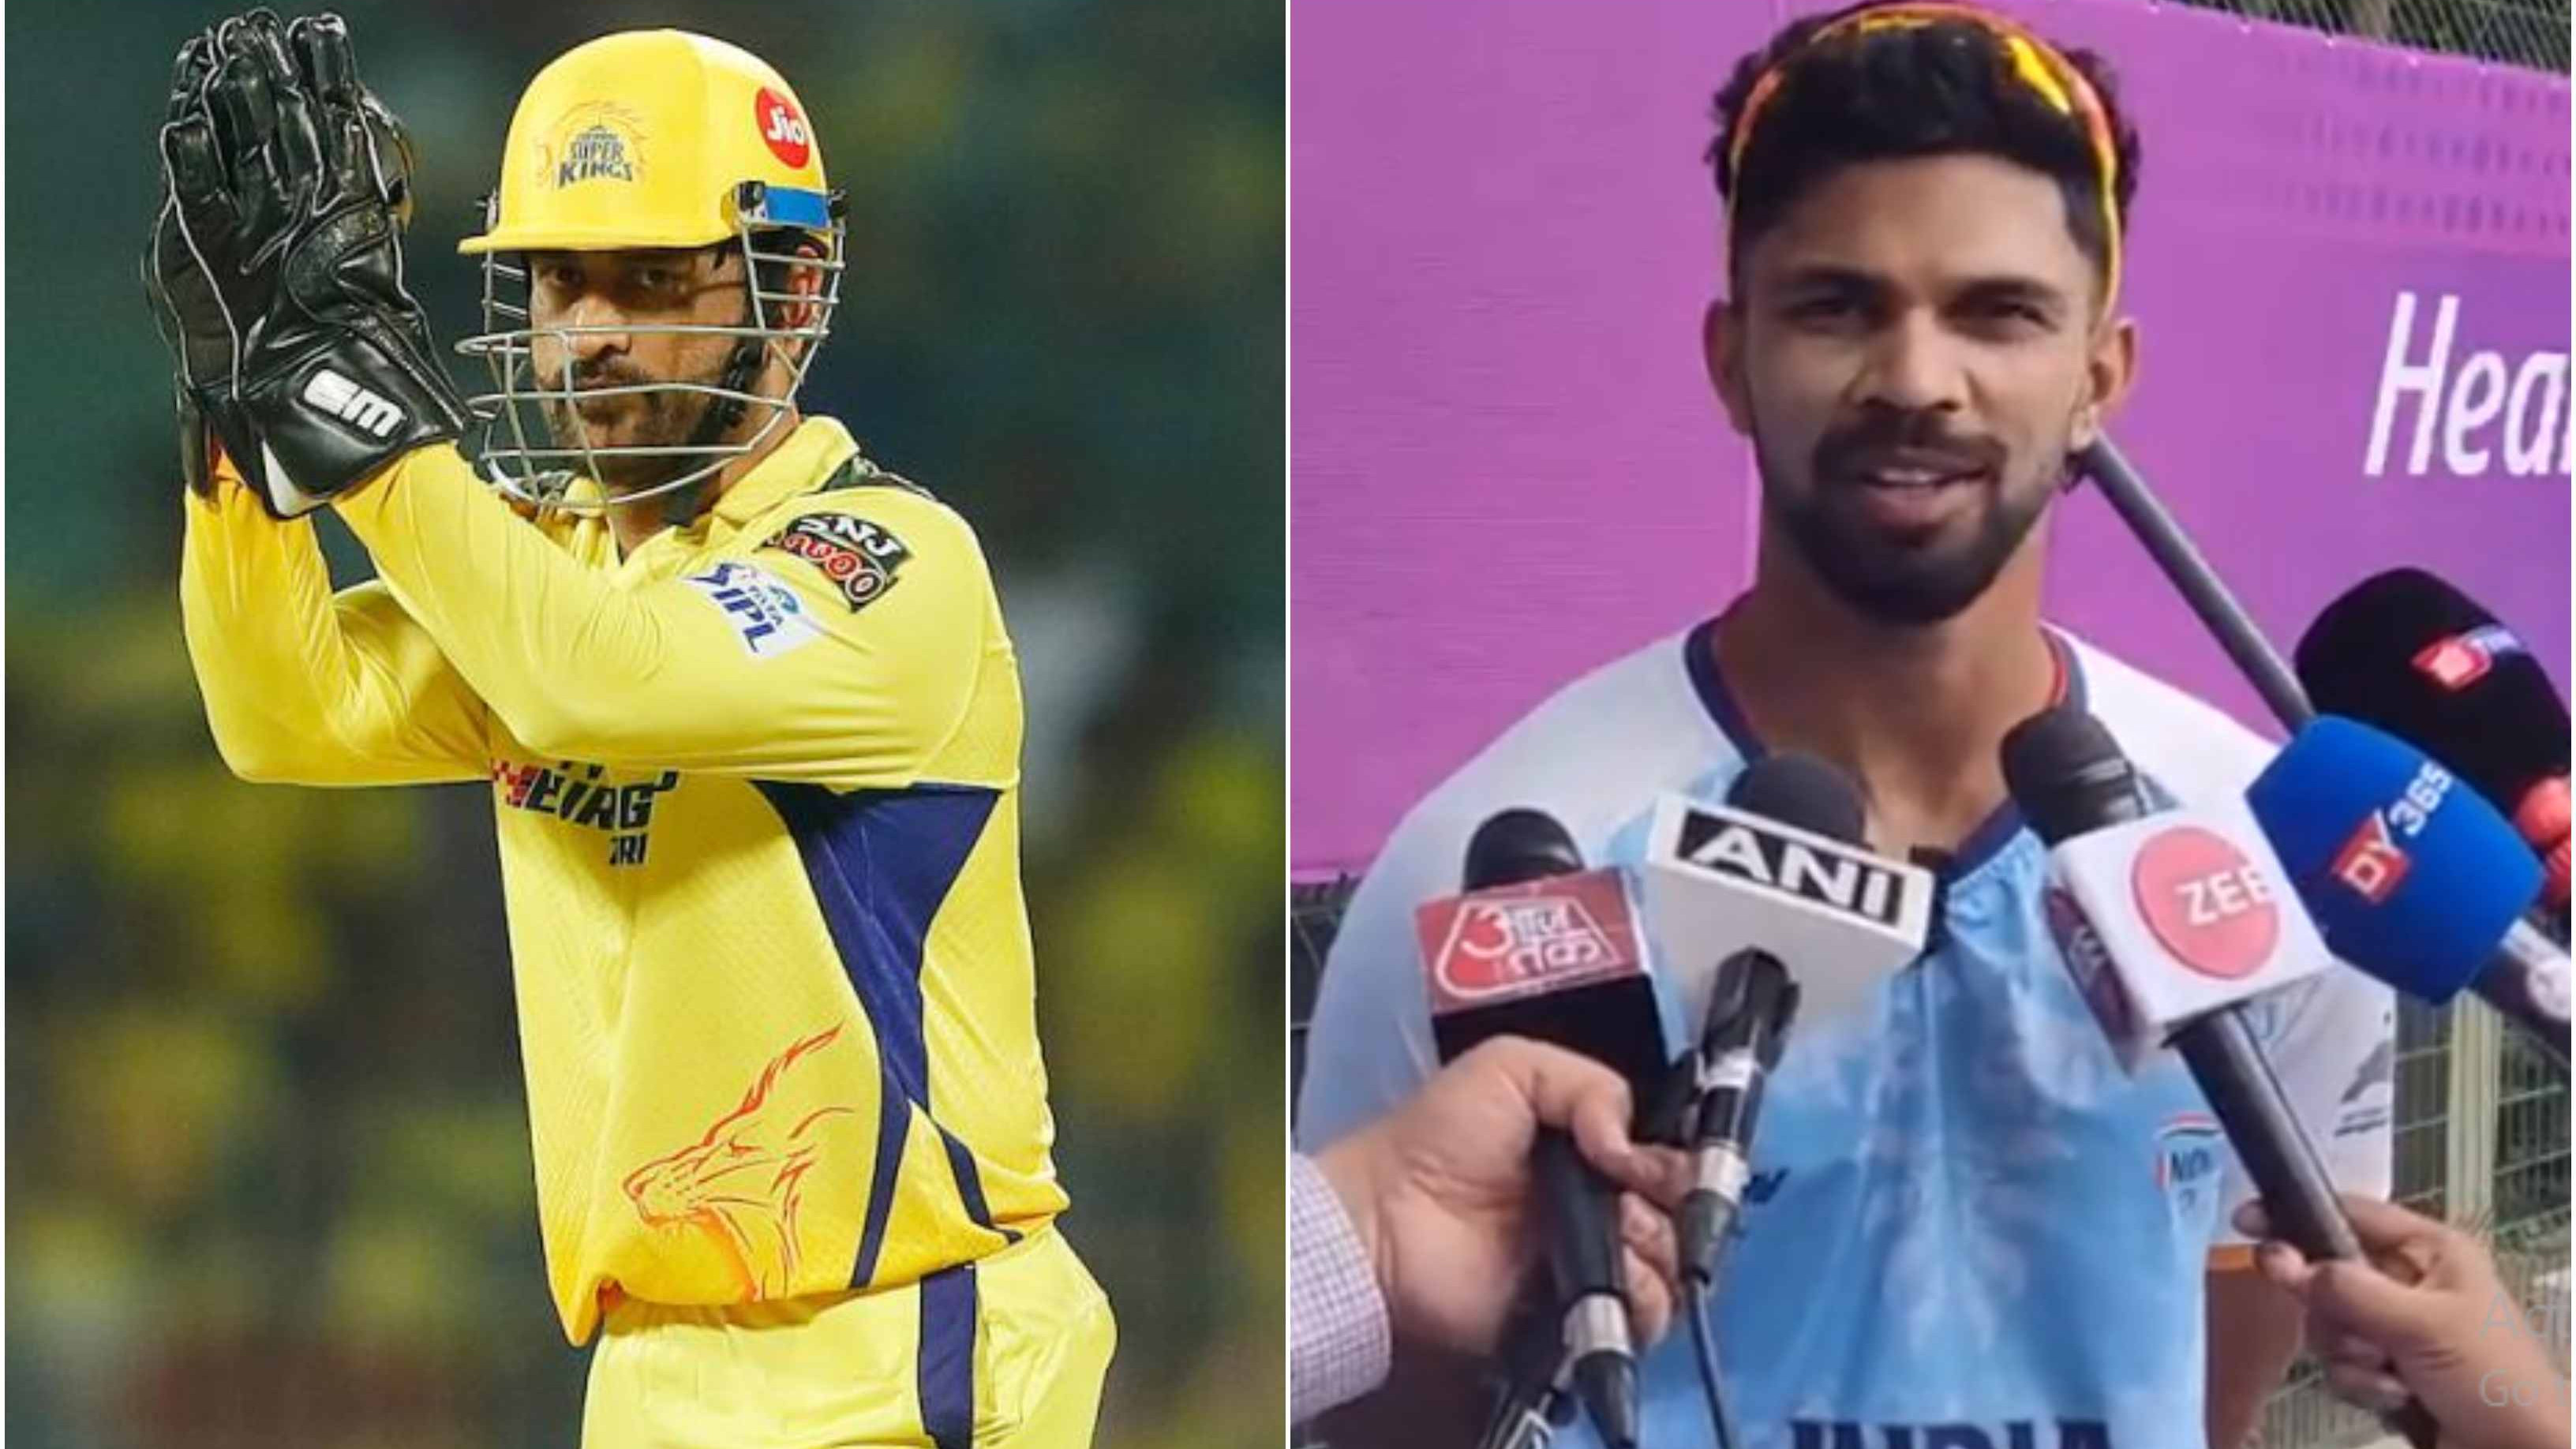 ‘Dhoni’s style is different, I will try to be myself’: Ruturaj Gaikwad on his captaincy ahead of India’s Asian Games campaign